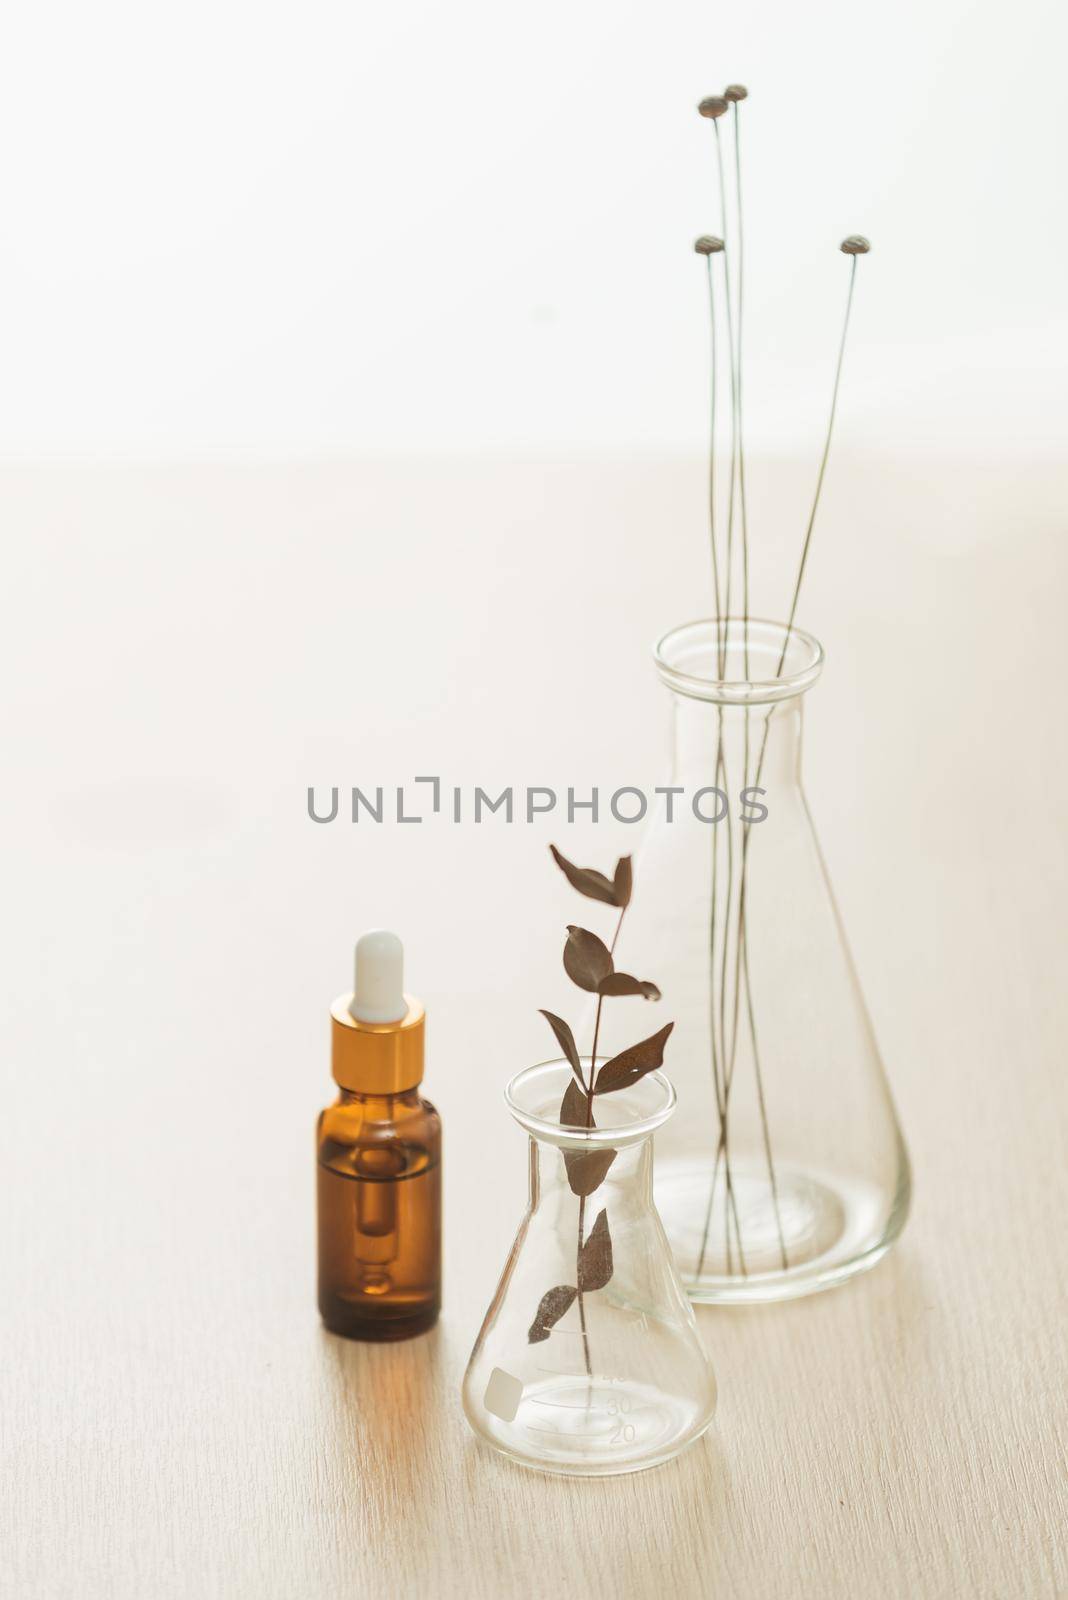 Cosmetic bottle stock images. Brown cosmetic bottle with batcher. Vials on a white background by makidotvn